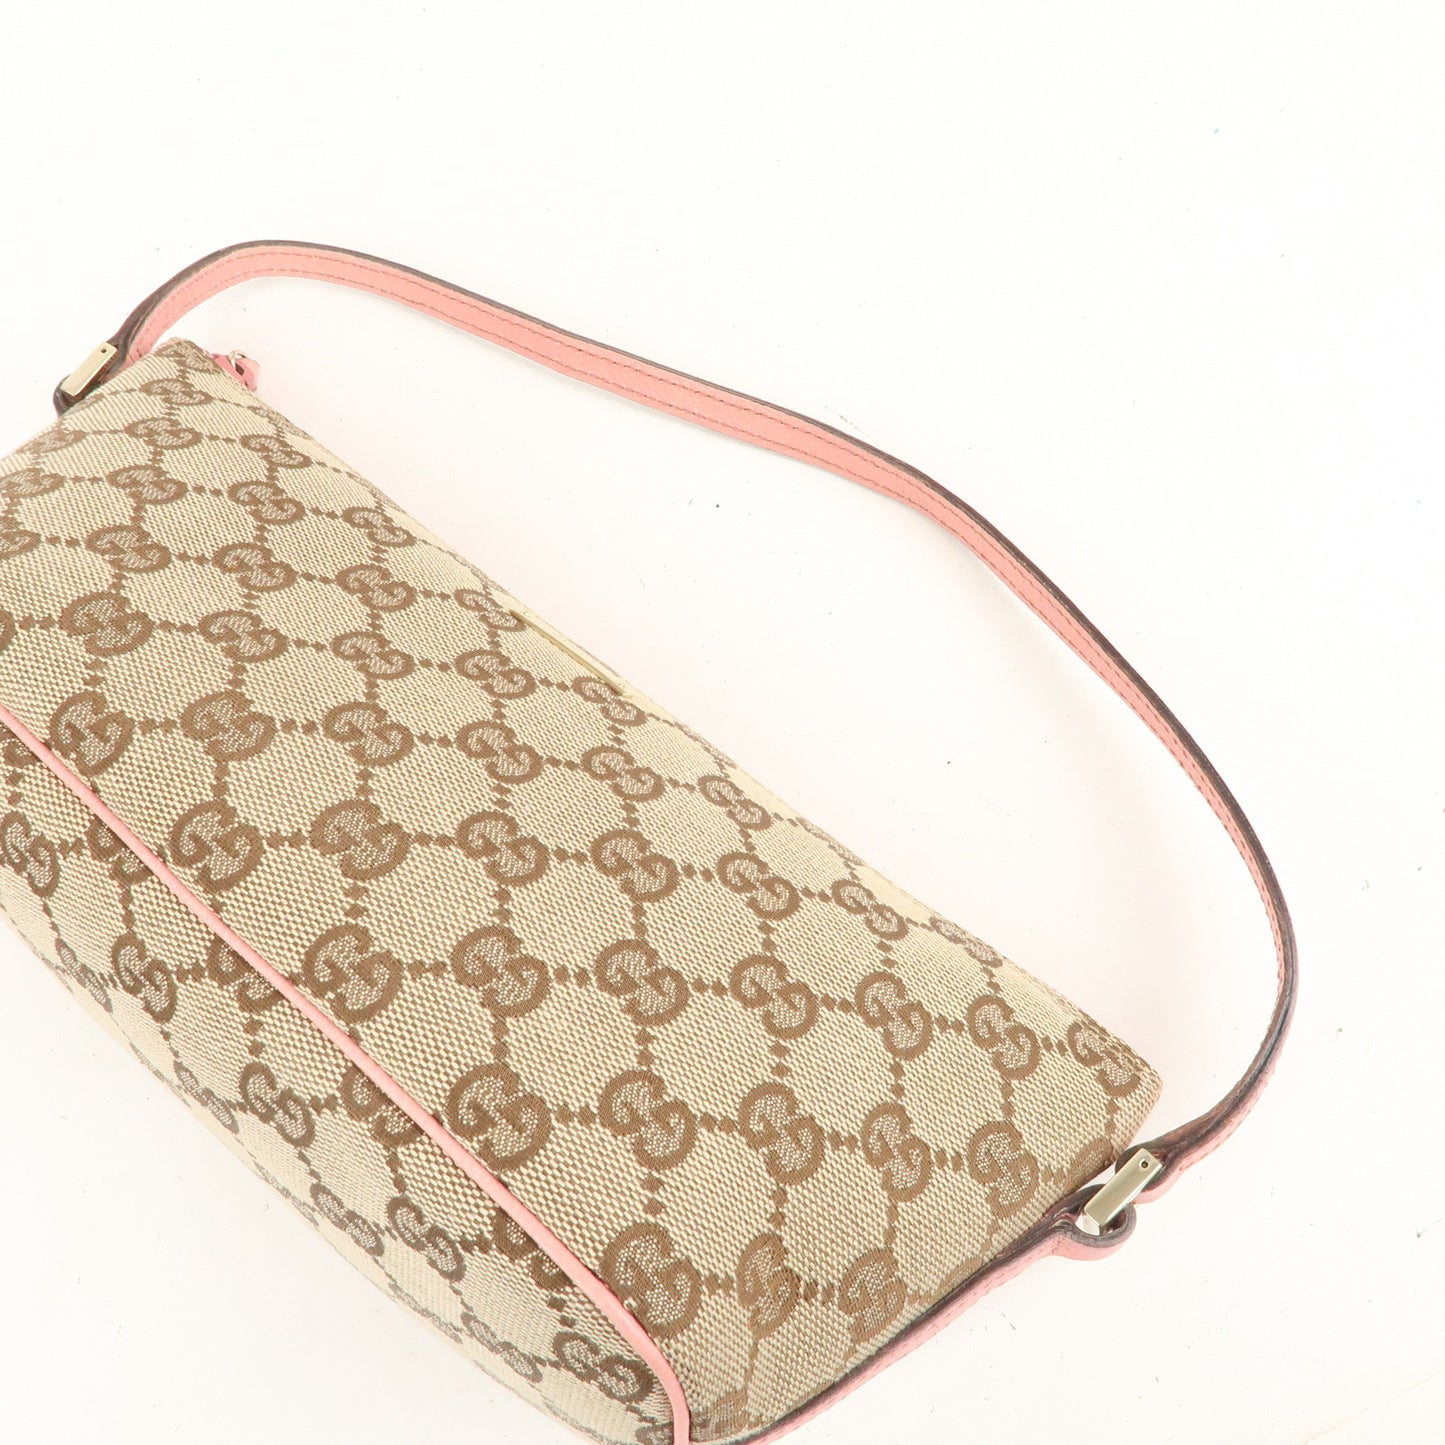 GUCCI Boat Bag GG Canvas Leather Hand Bag Pouch Beige Pink 07198